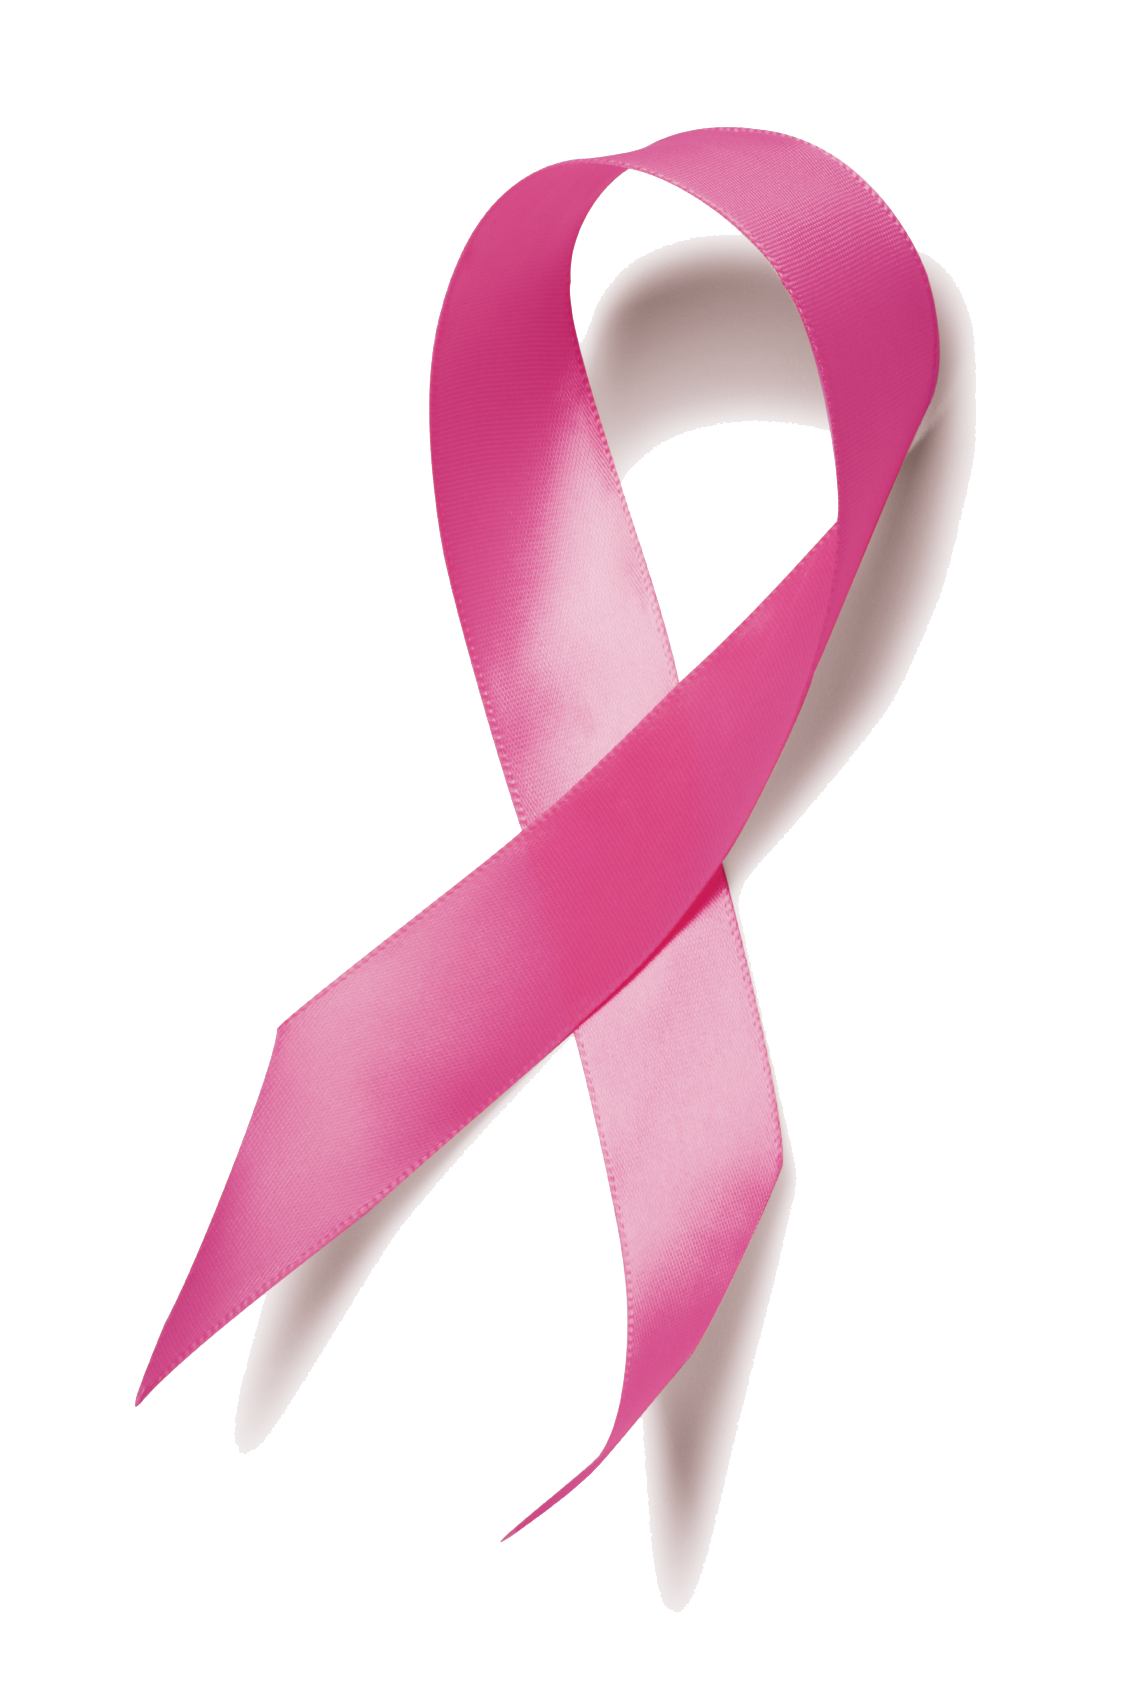 breast-cancer-ribbon-png-transparent-images-png-all